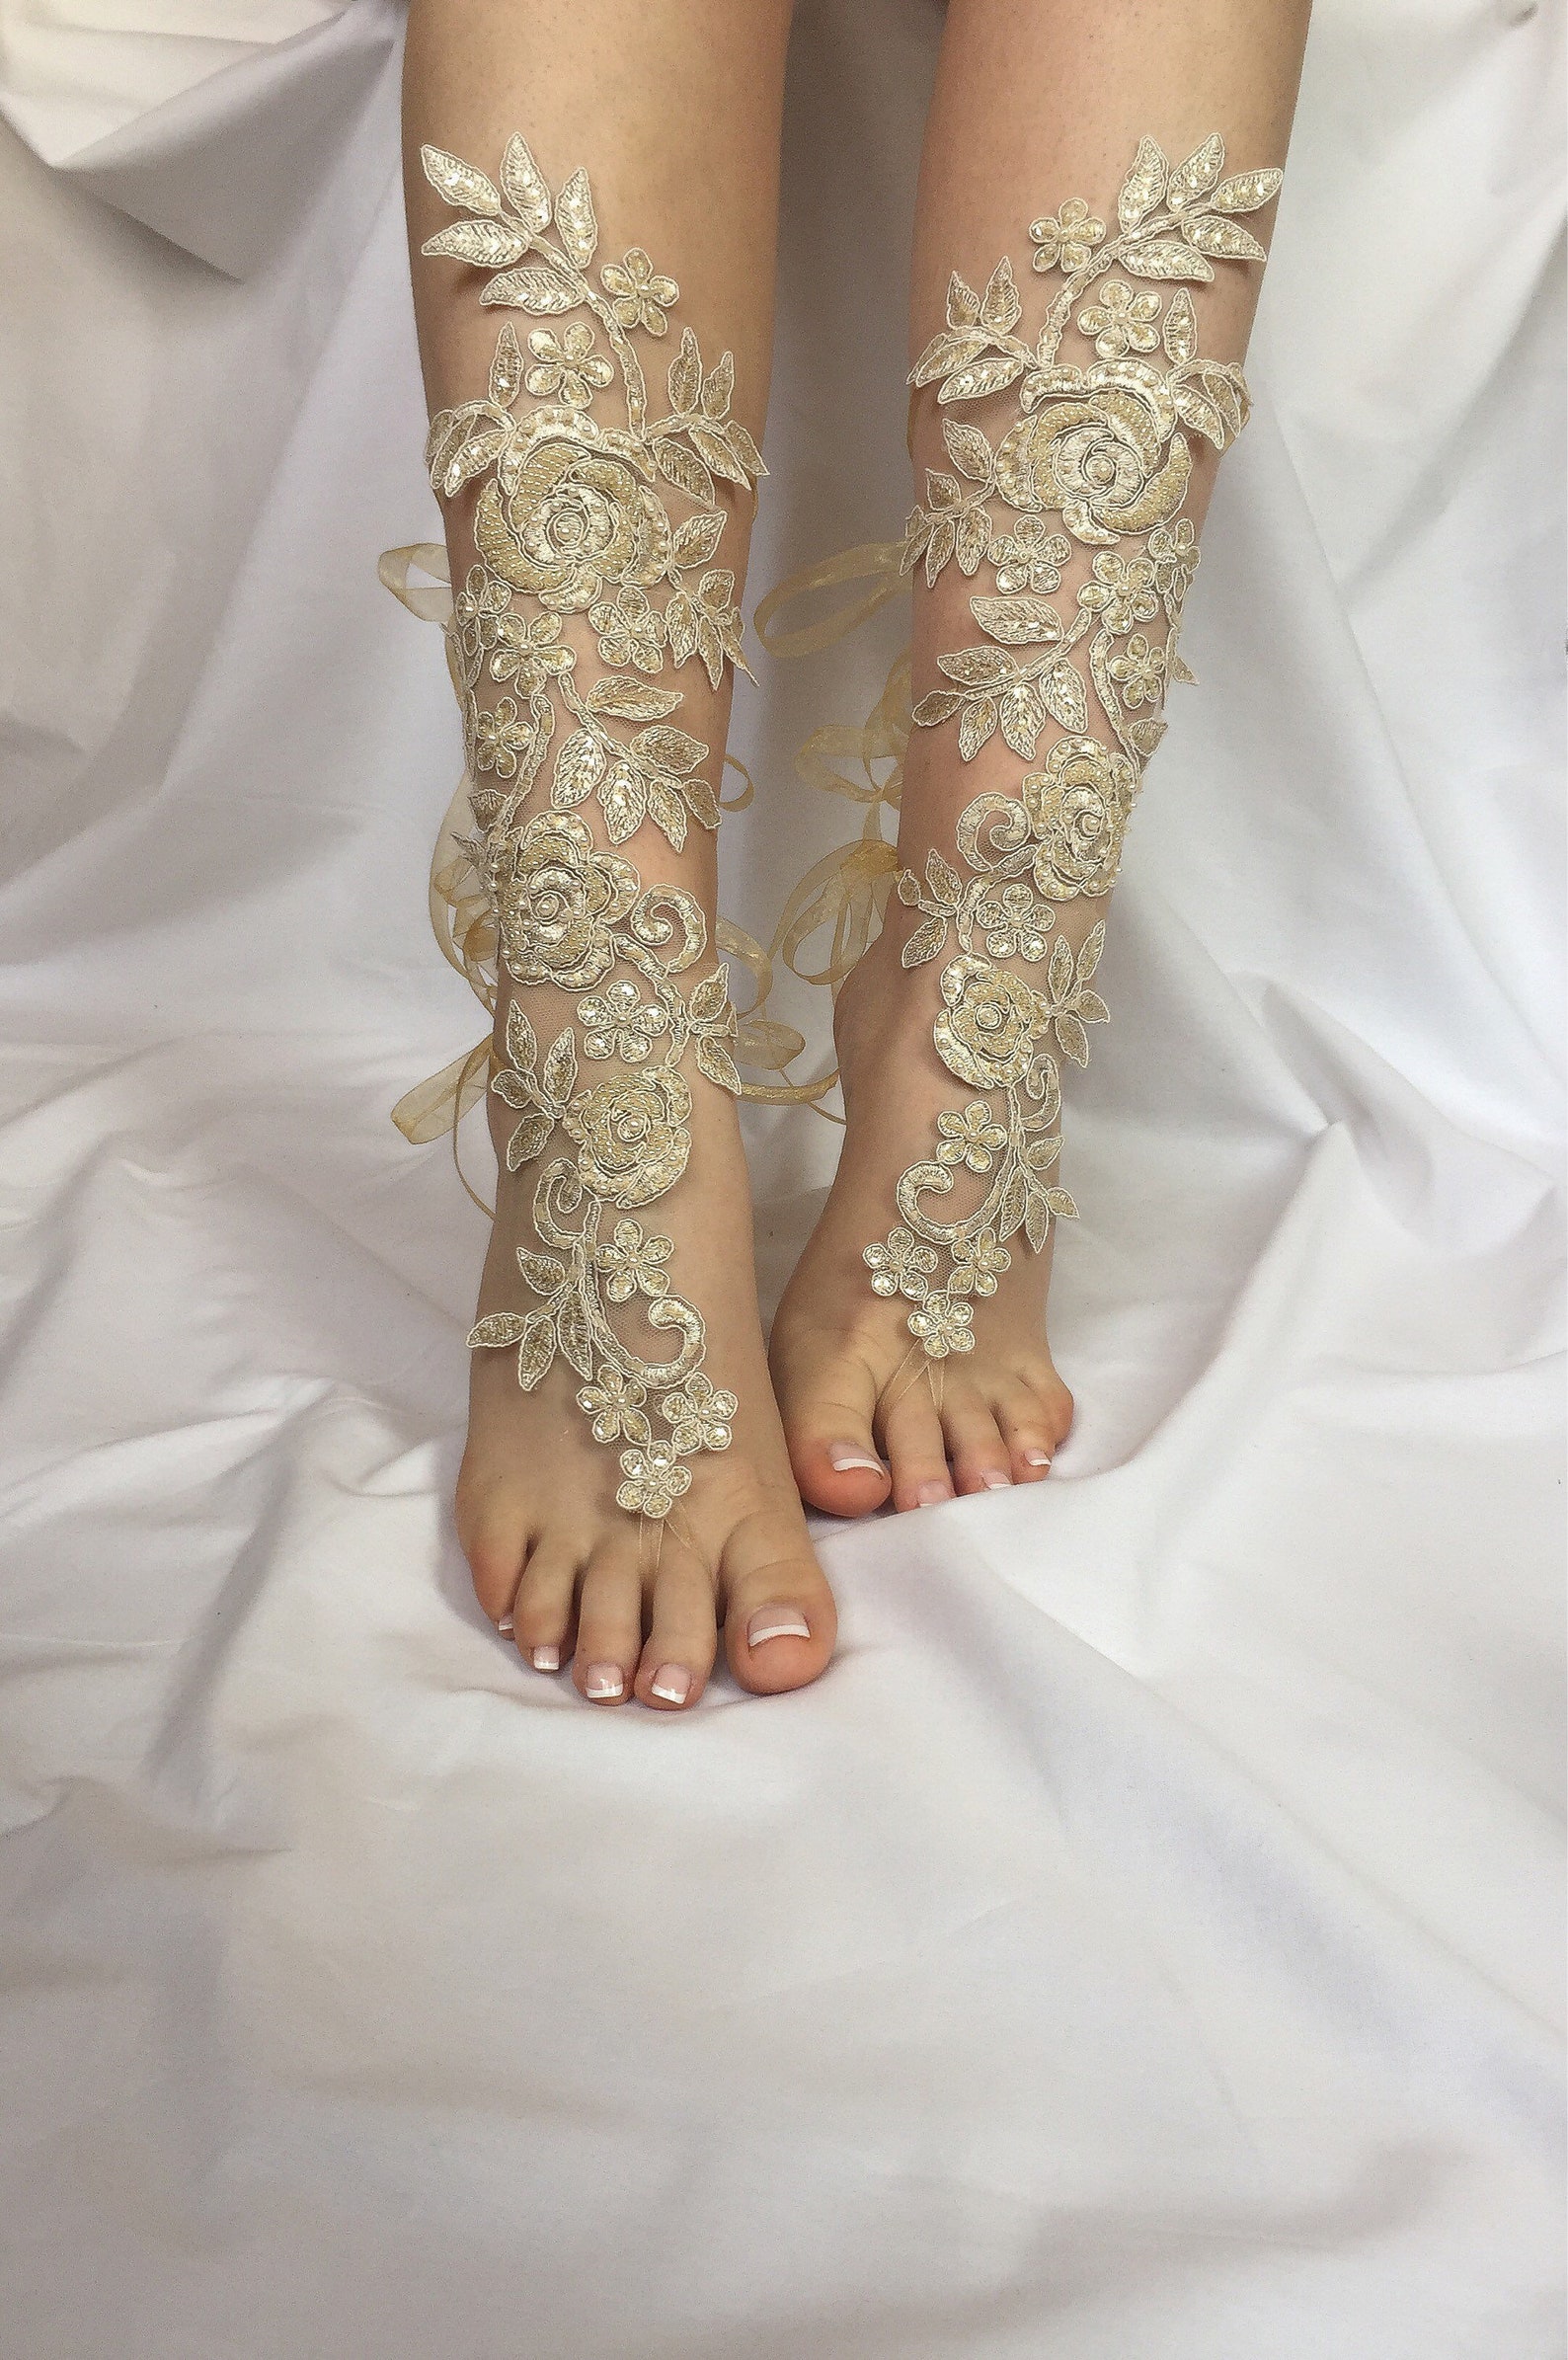 Bridal Barefoot Sandals Lace Wedding Shoes Long Foot | Etsy